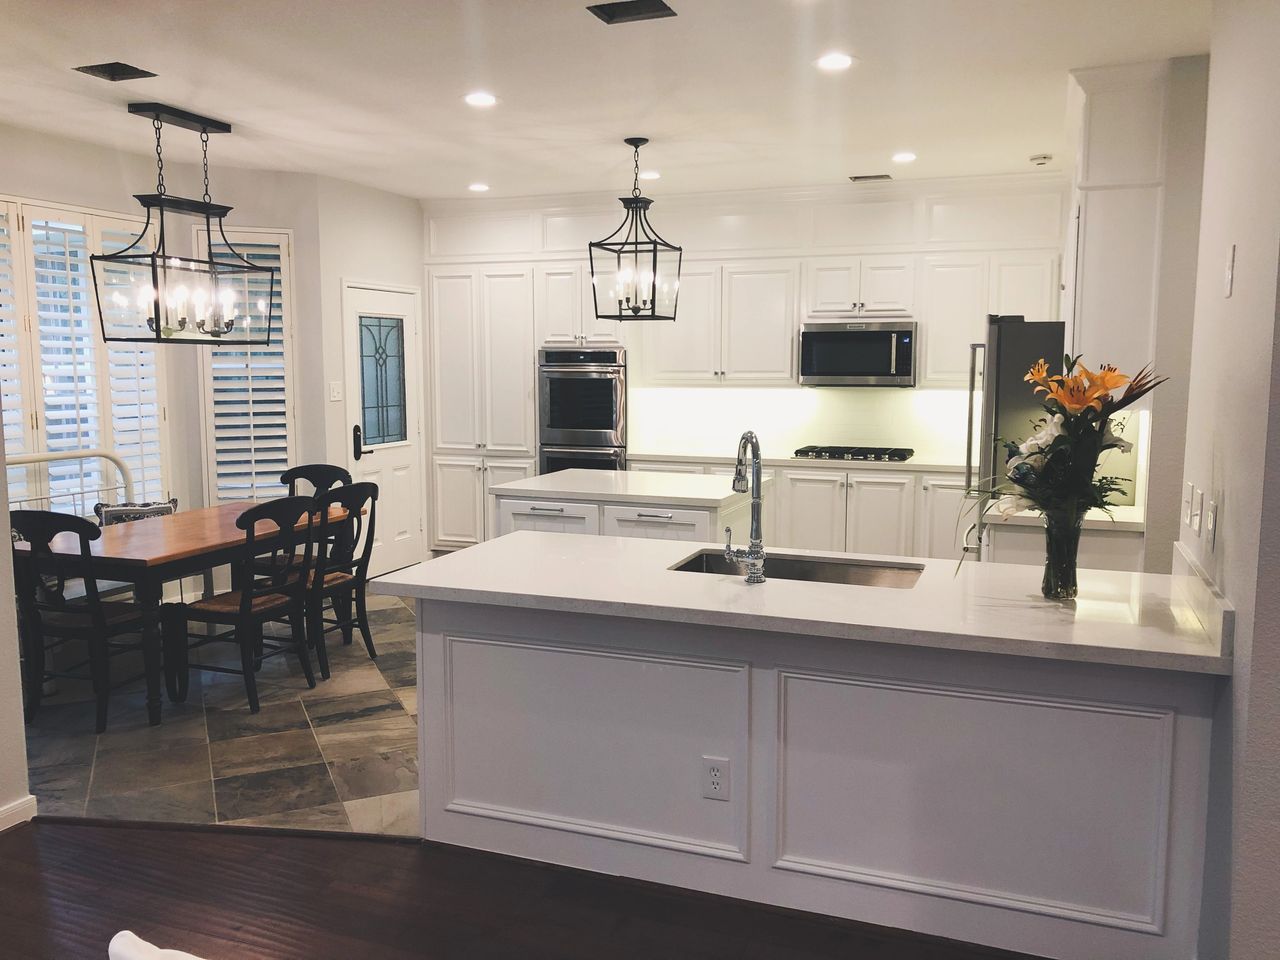 Kitchen & Bathroom remodeling in The Woodlands, Tx. - General Contractor